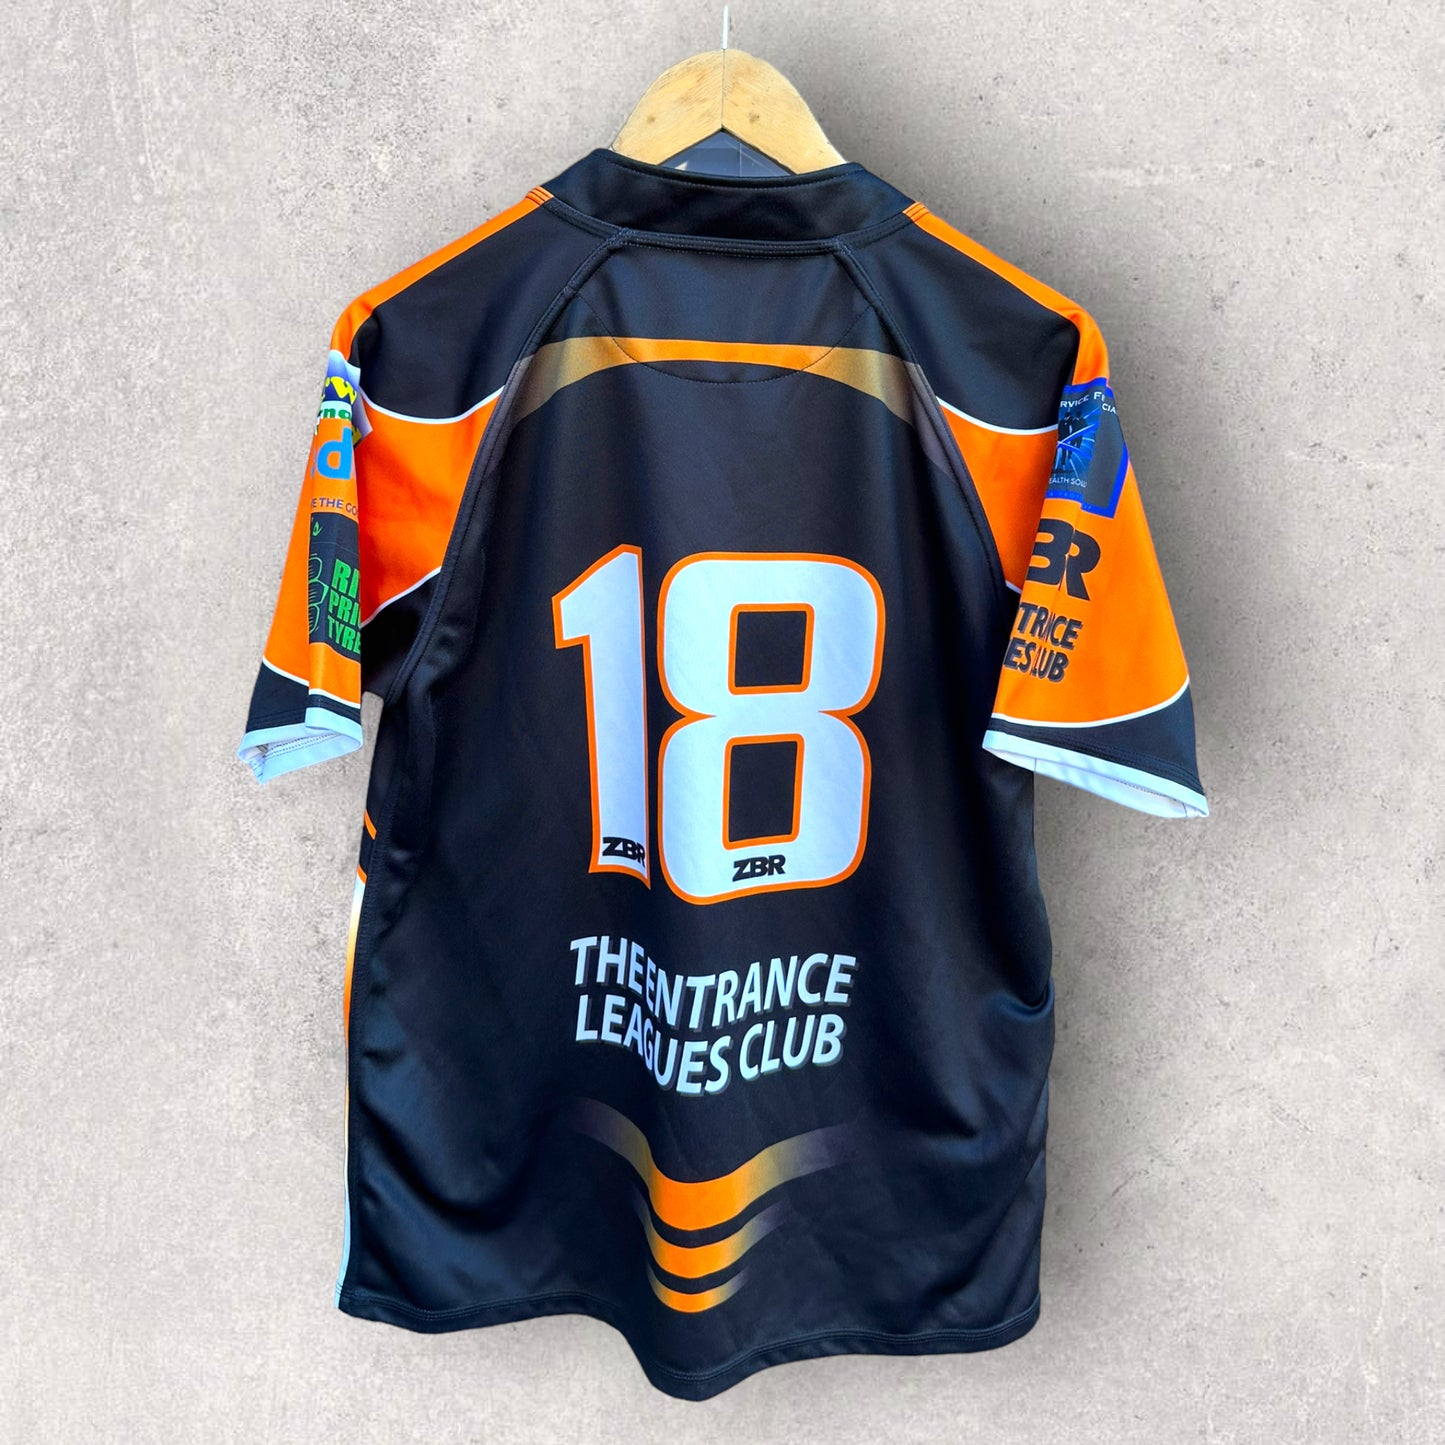 THE ENTRANCE TIGERS MATCH JERSEY